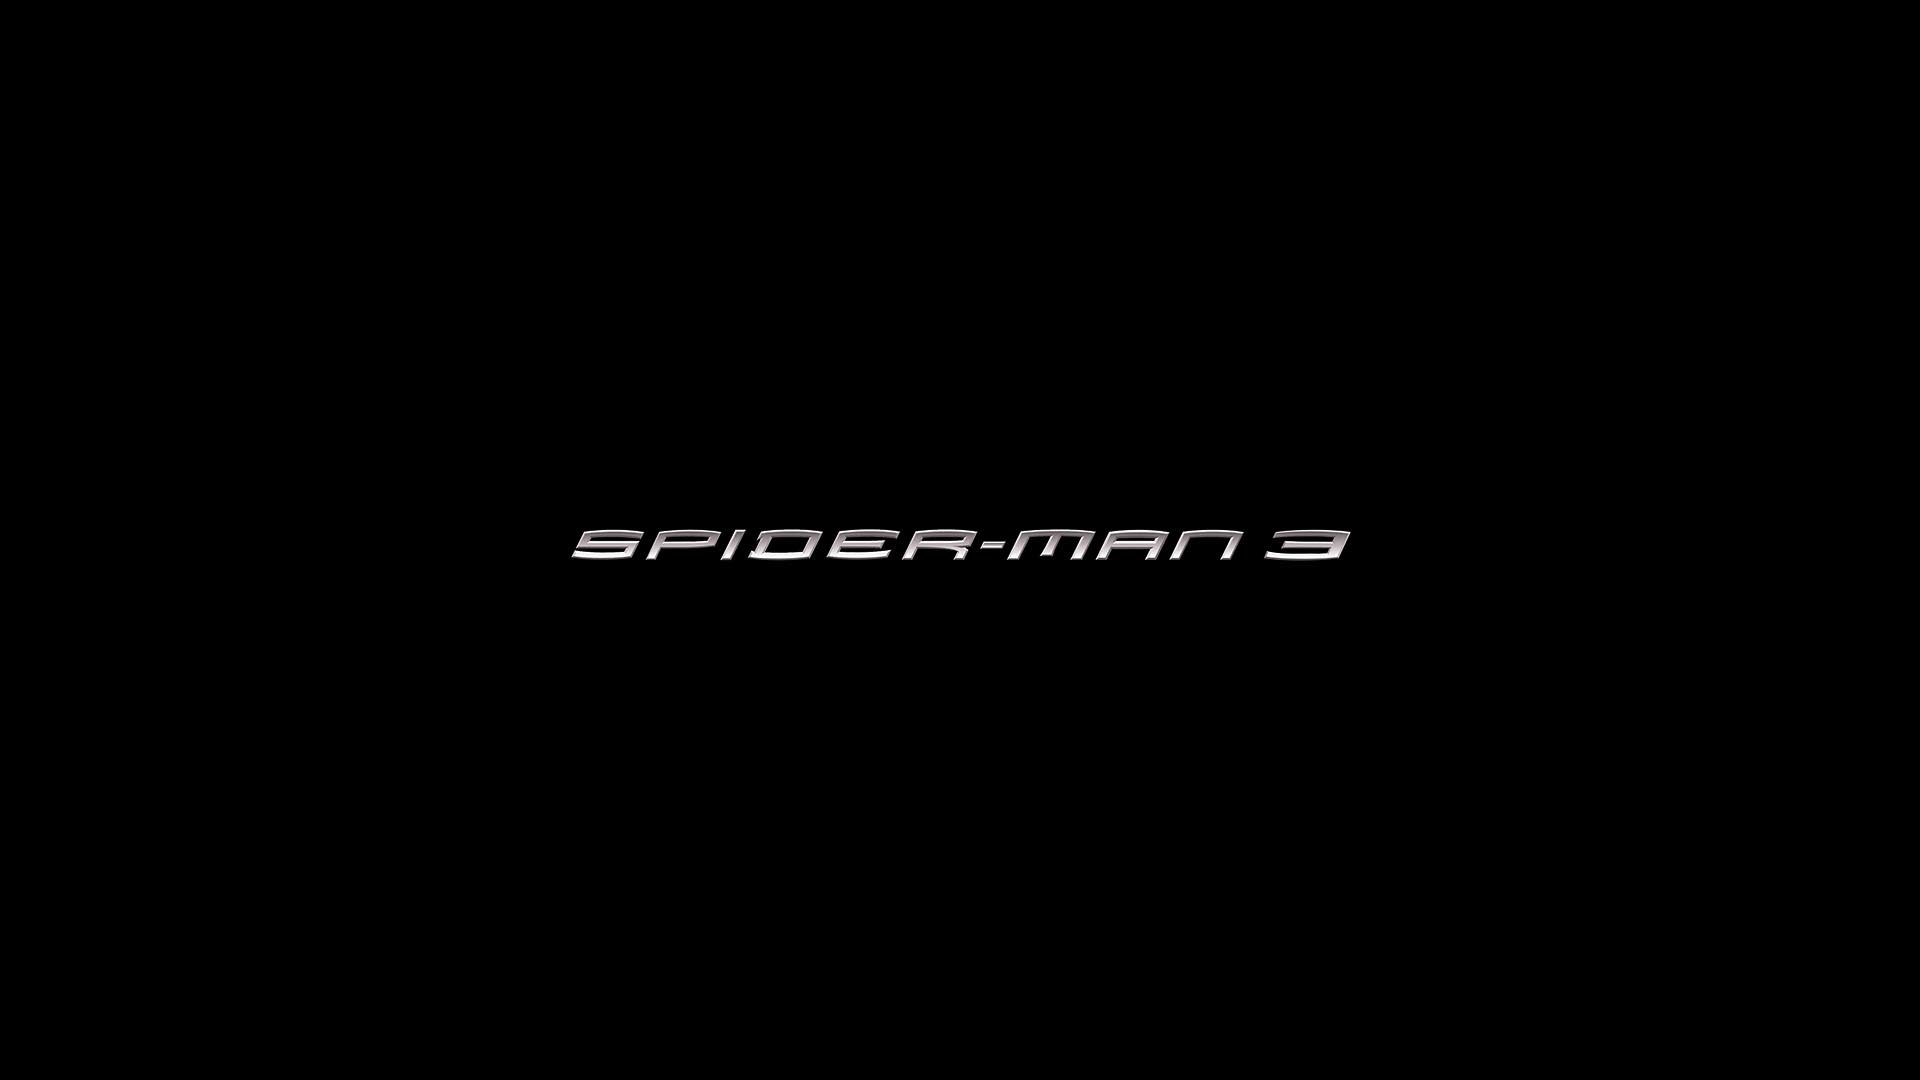 Awesome Spider-Man 3 free background ID:161080 for hd 1080p computer